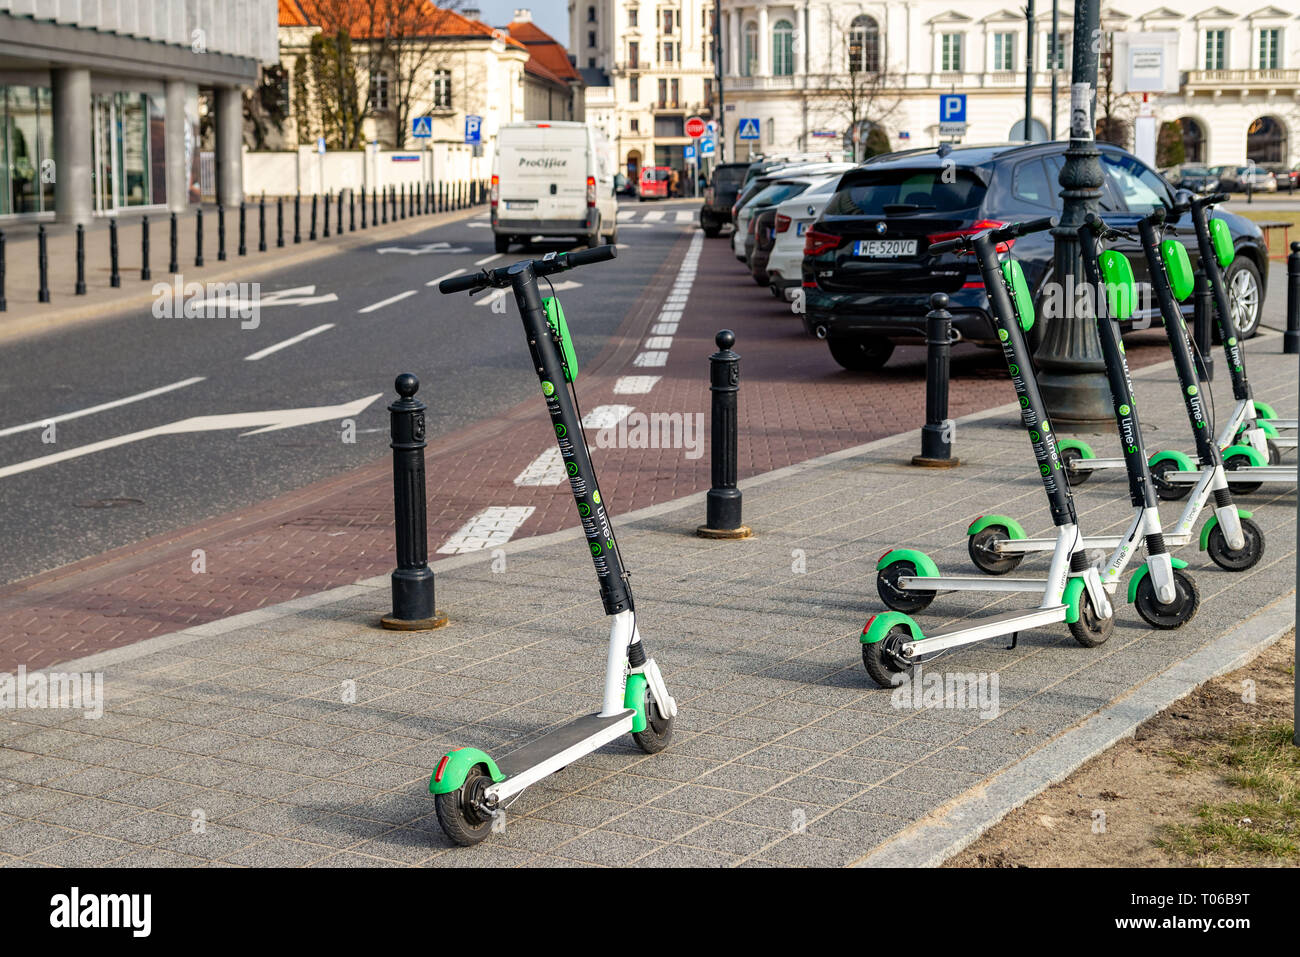 Electric scooter parked on the road. Warsaw Poland. February 18, 2019. Stock Photo